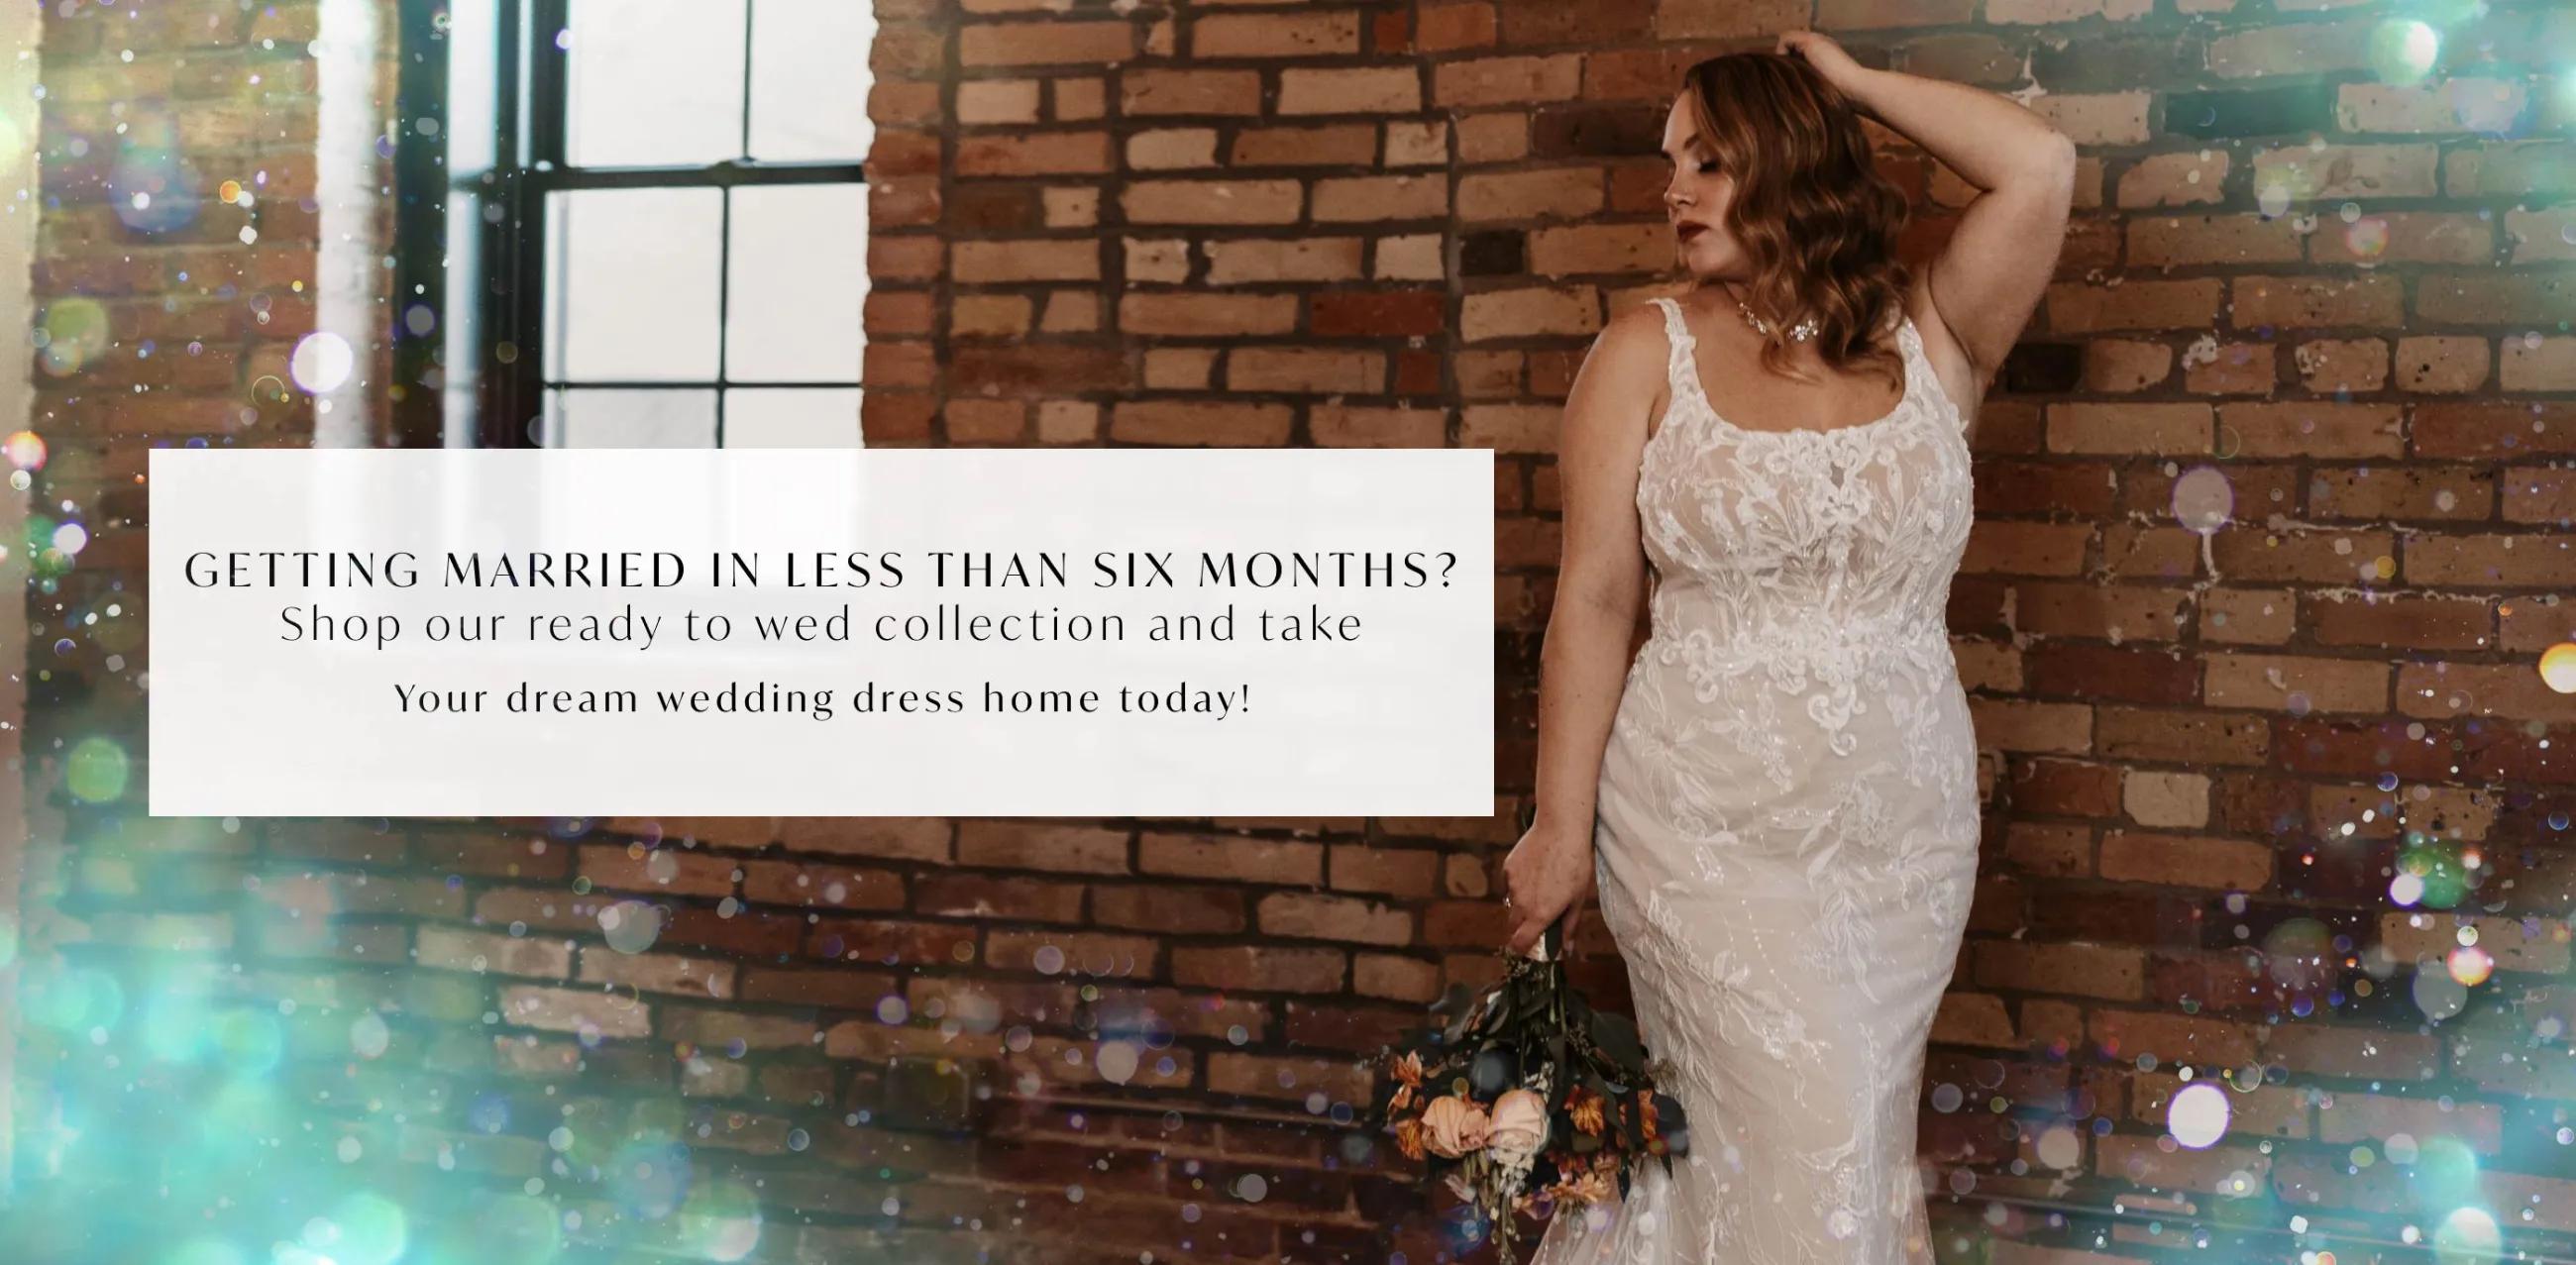 getting married in less than 6 months banner for desktop